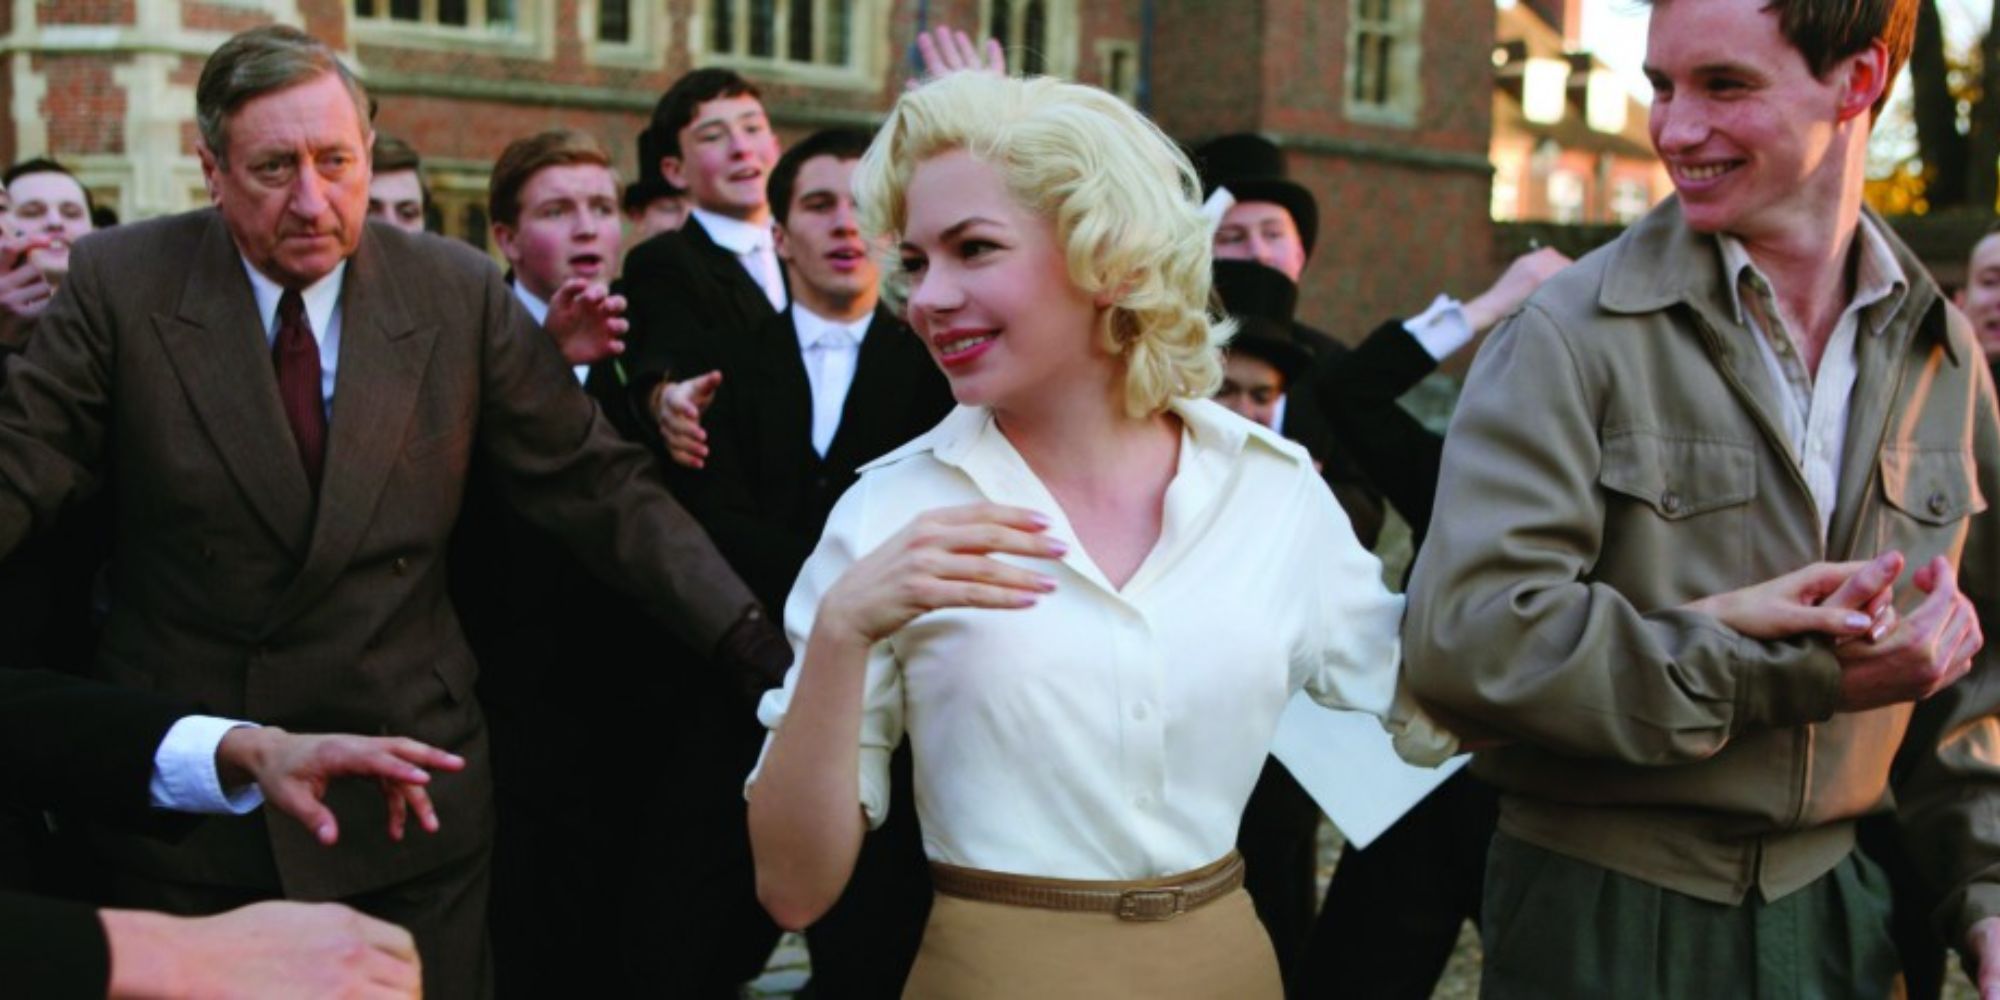 Marilyn Monroe smiling at a crowd while being scorted by a smiling man in My Week with Marilyn.